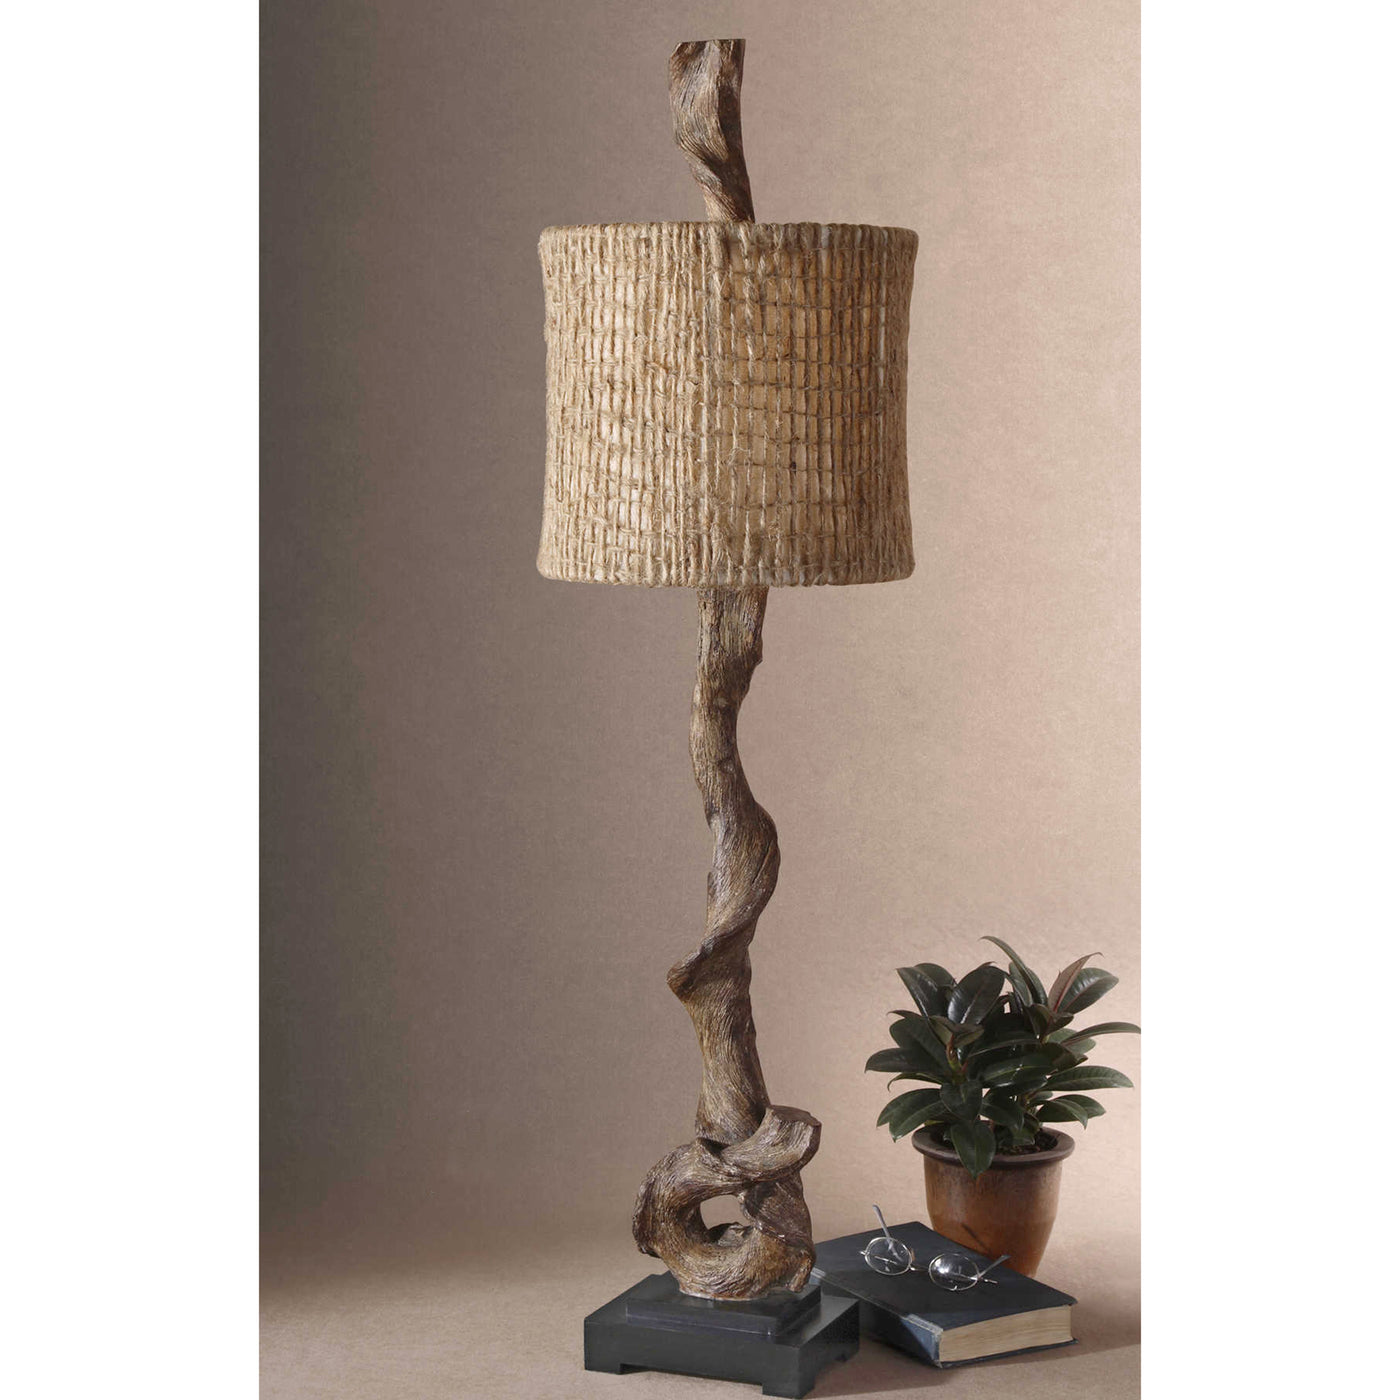 Weathered Driftwood Finish With A Matching Finial And A Matte Black Base. The Round Drum Shade Is Burlap Twine With An Ope...